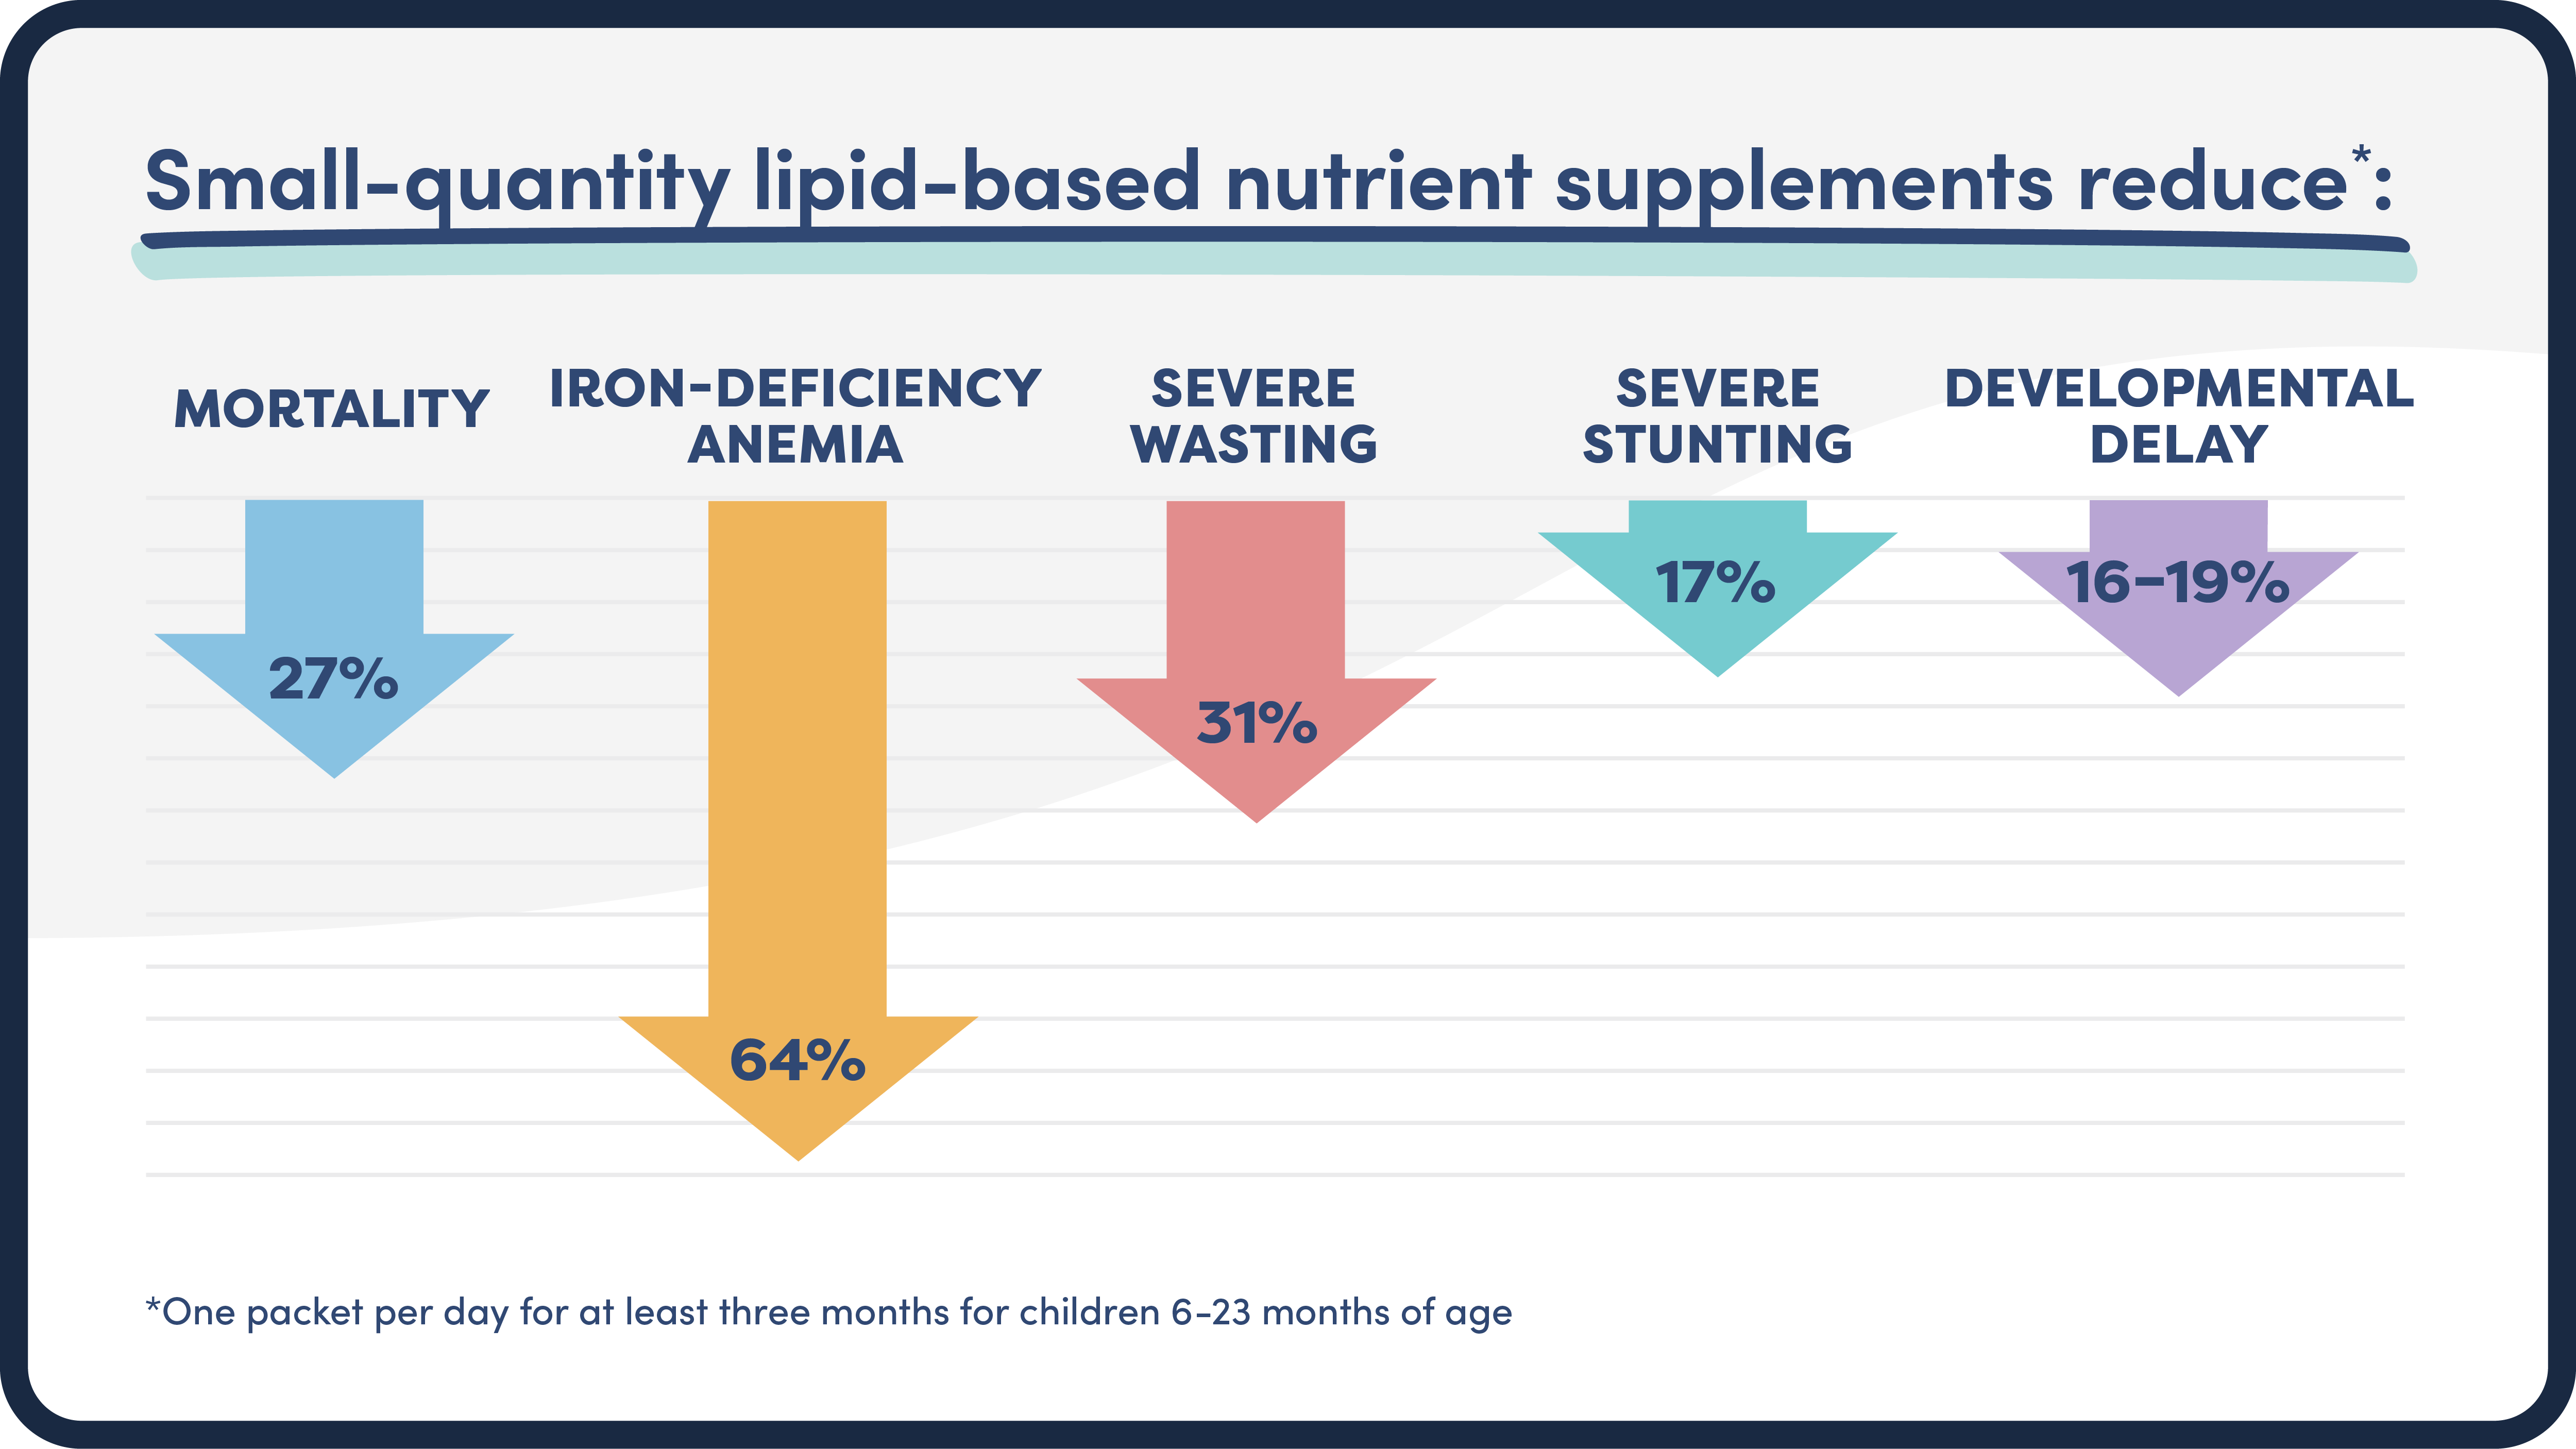 Small quantity lipid-based supplements prevent child malnutrition and mortality